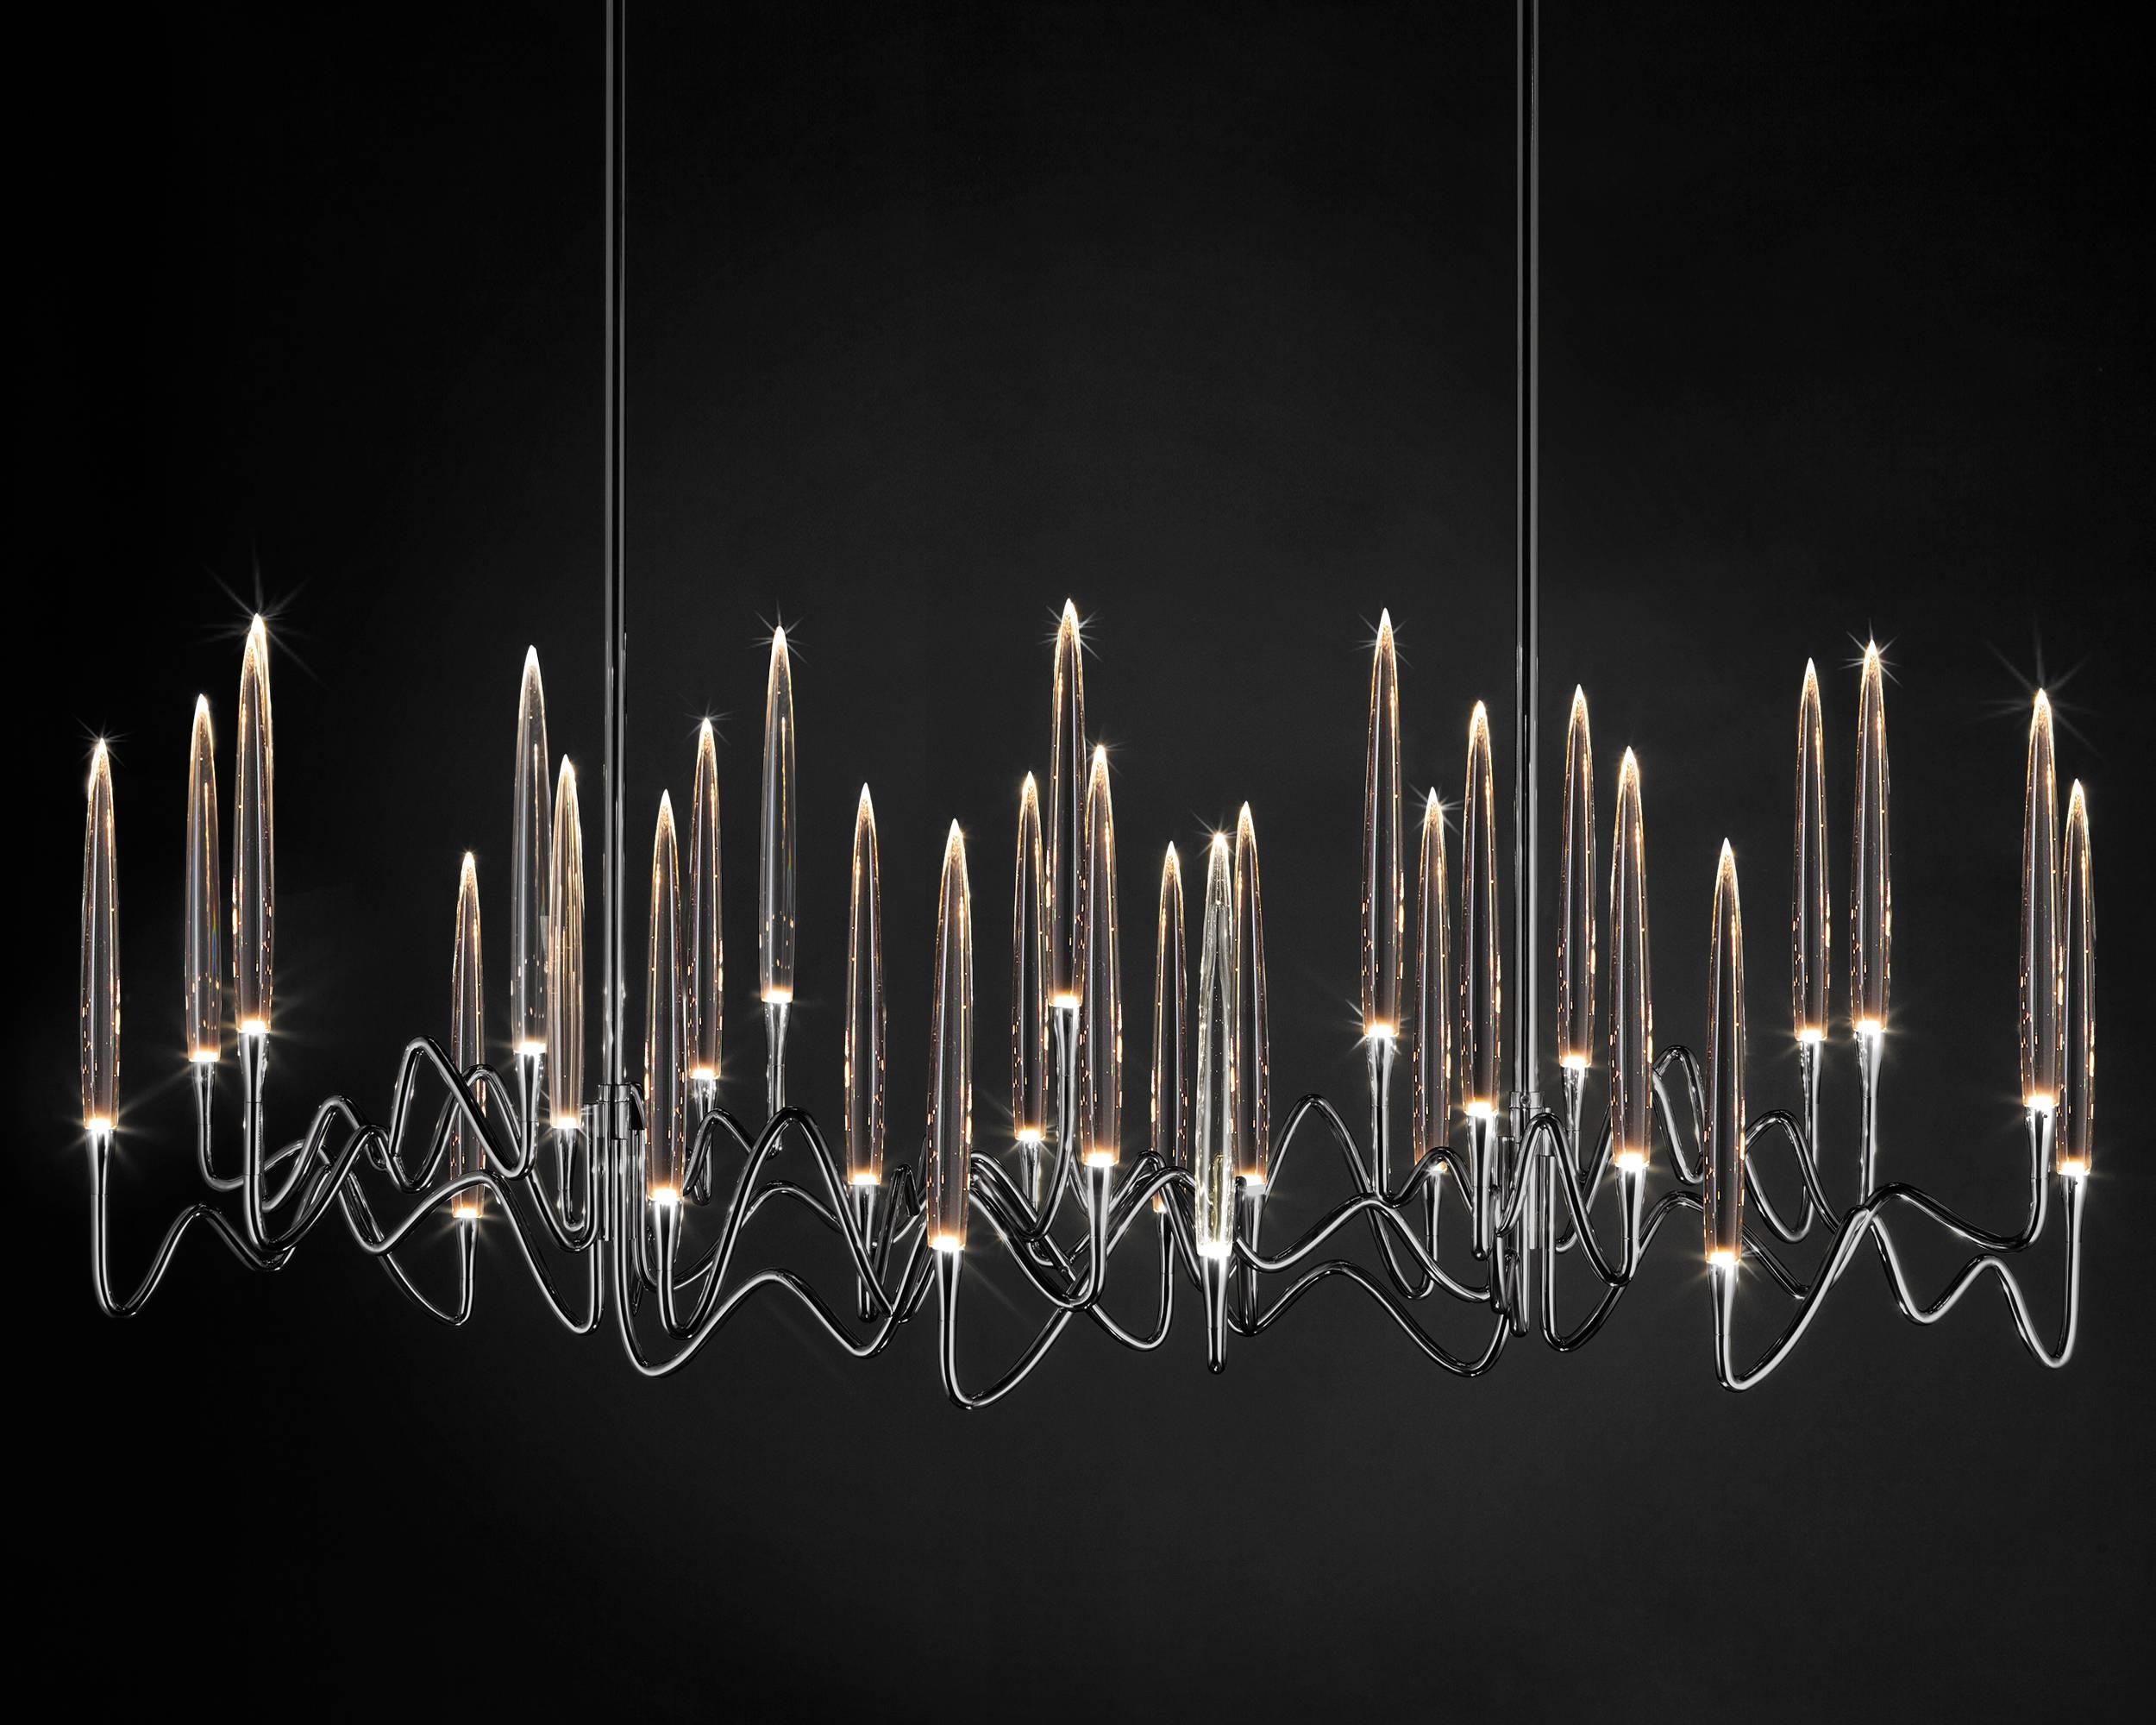 Inspired by Arabic calligraphic art and the icon of the classical candelabrum is Il Pezzo 3 chandelier, with a hand-forged brass structure and elegant “candles” crafted from solid crystal.
The candles are illuminated using the latest LED technology,